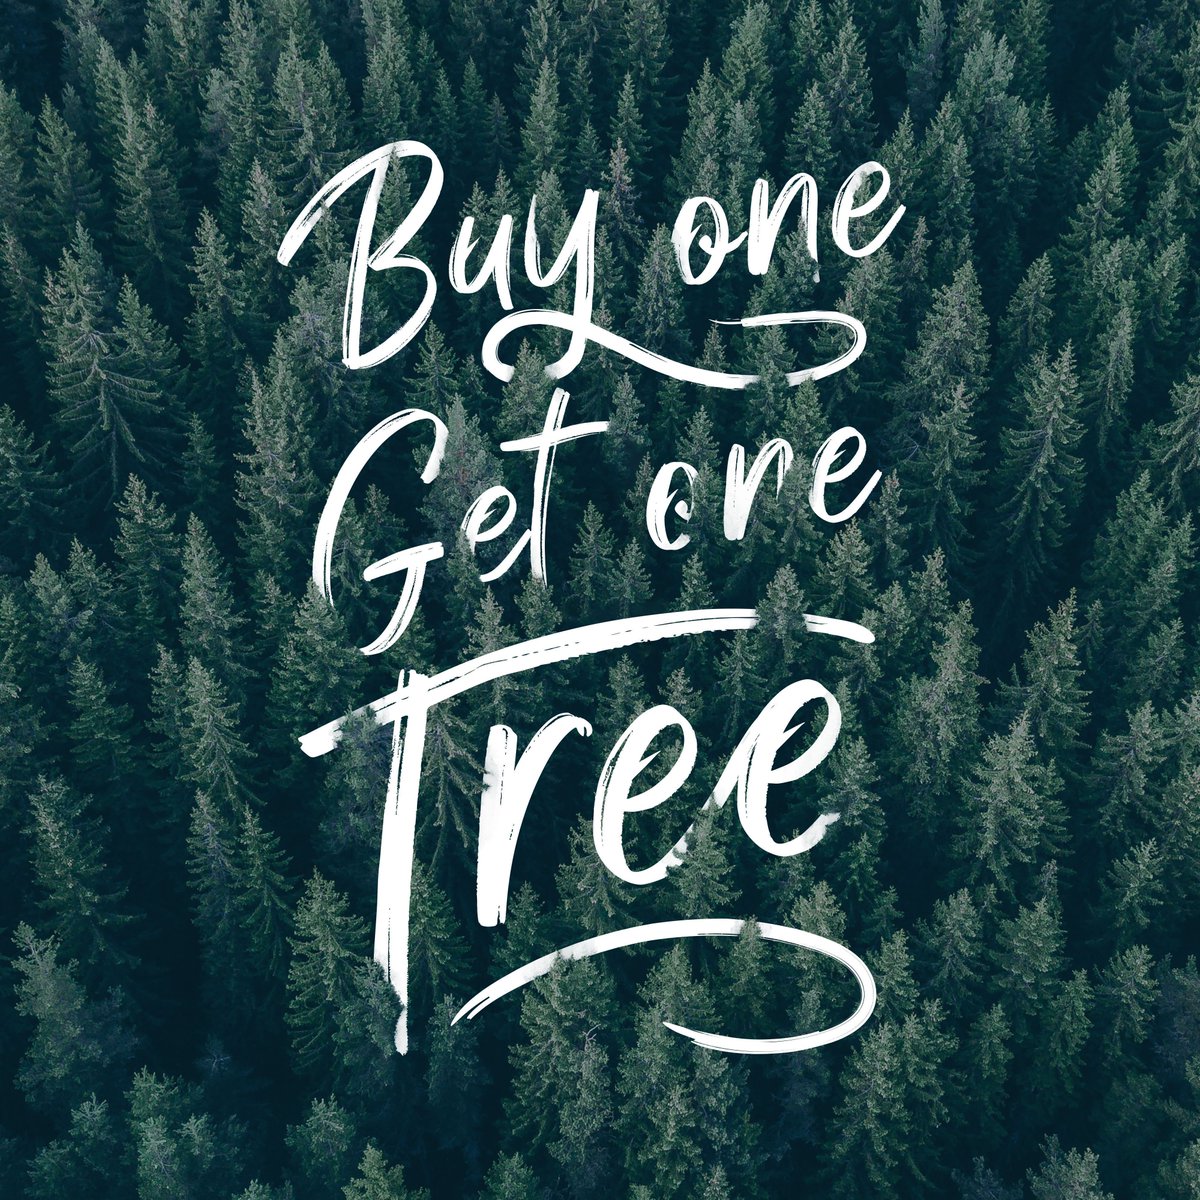 This weekend, ends Midnight Sunday 19th Feb 2023 UK time. 
£1 from every sale goes to @TCFcharityUK - peer to peer support for bereaved parents, siblings and Grandparents @Teemillstore 
#supportsmallbusiness #buyonegetonetree #Sustainability #SustainableFashion #uksmallbusiness